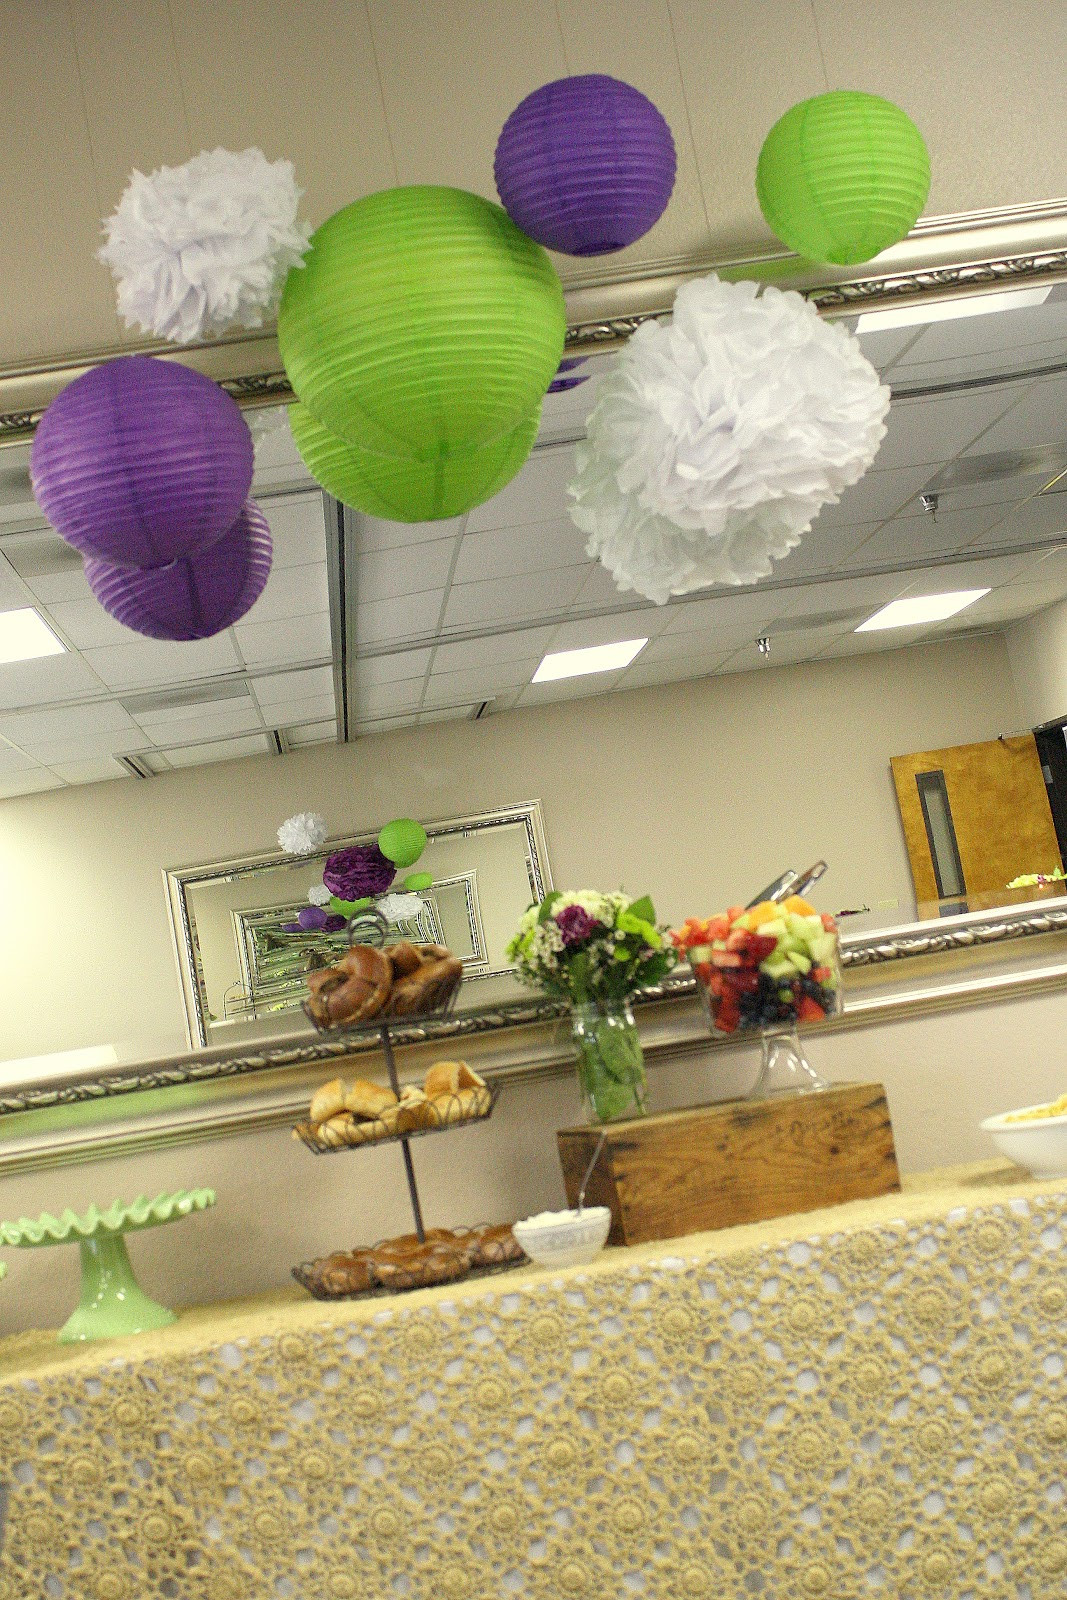 Green Baby Shower Decor
 Purple And Green Baby Shower Decorations